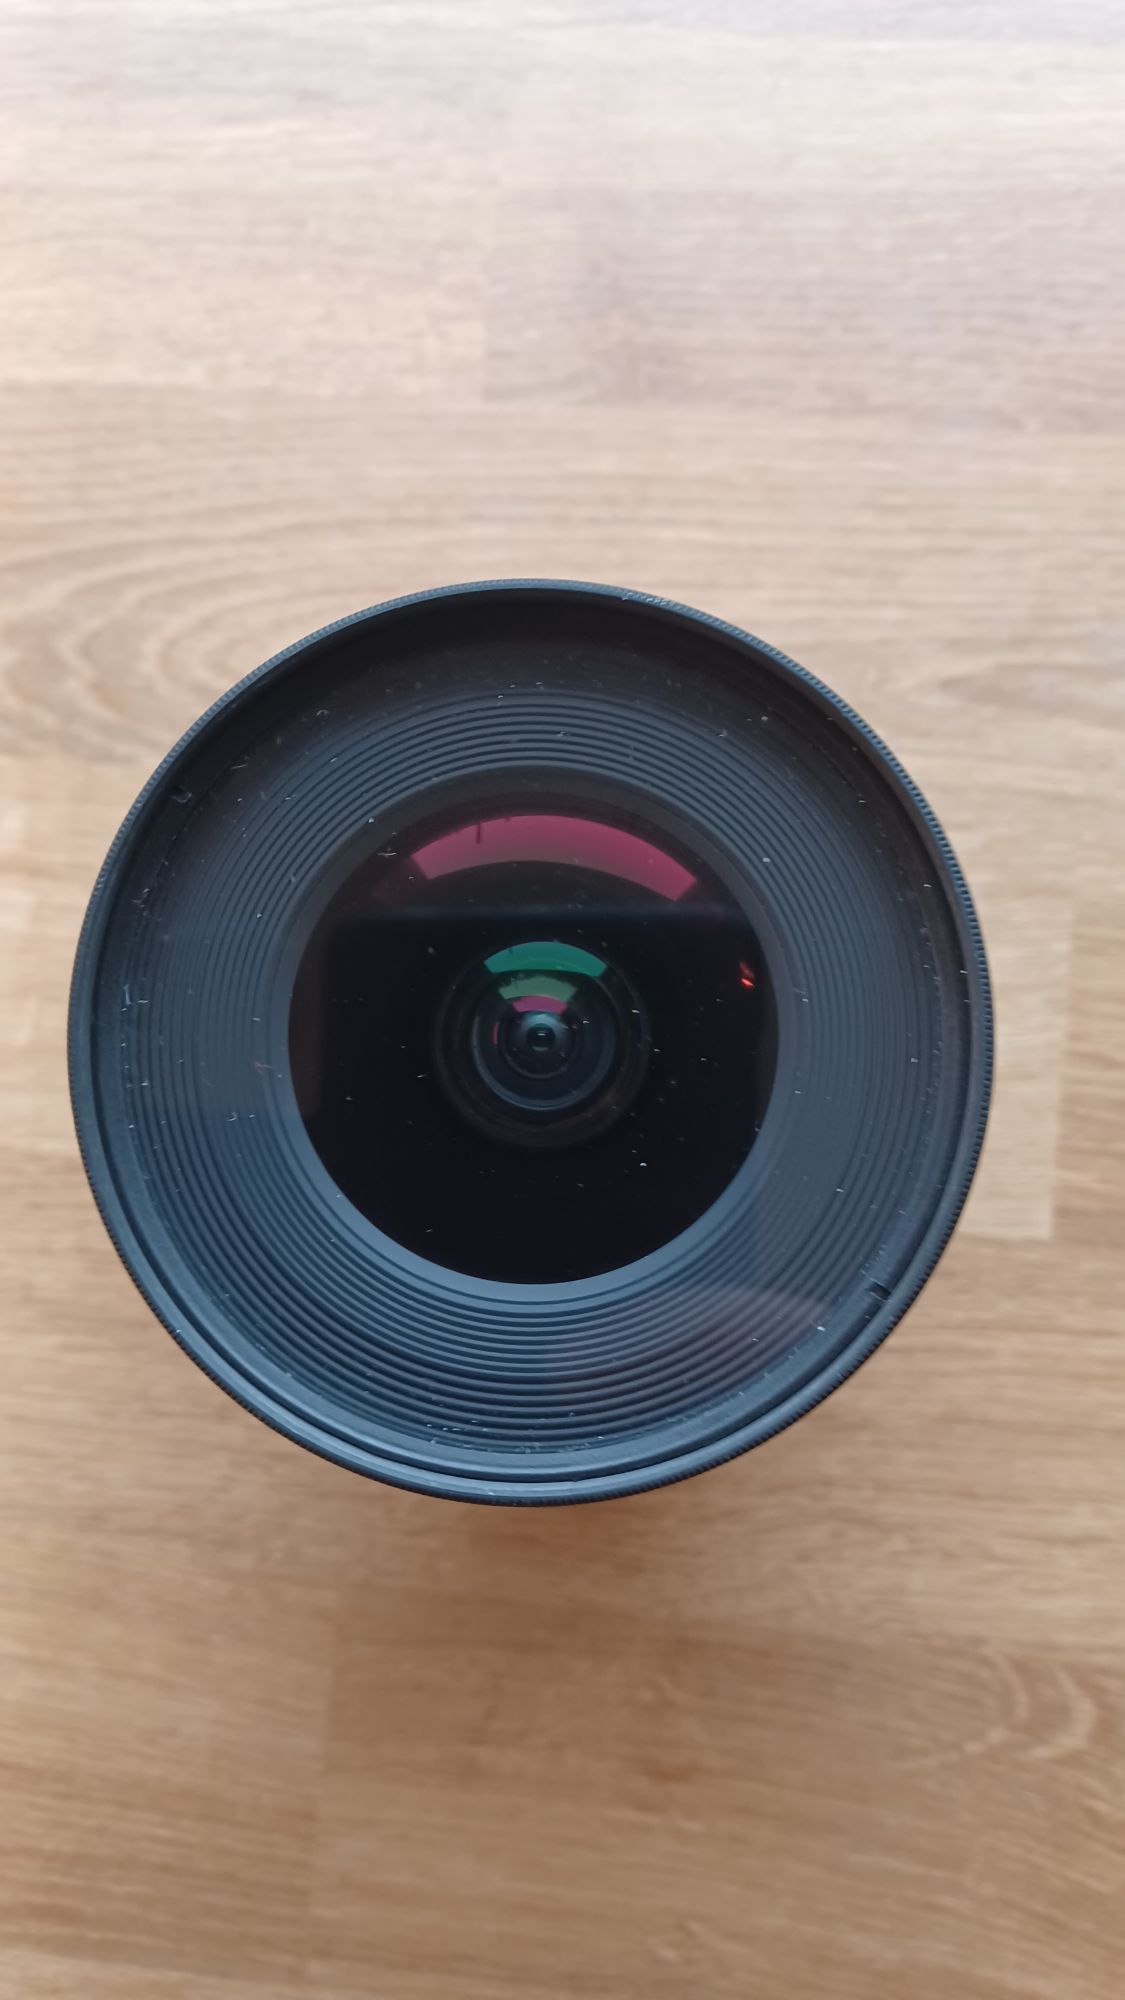 Sigma 10 to 20mm lens